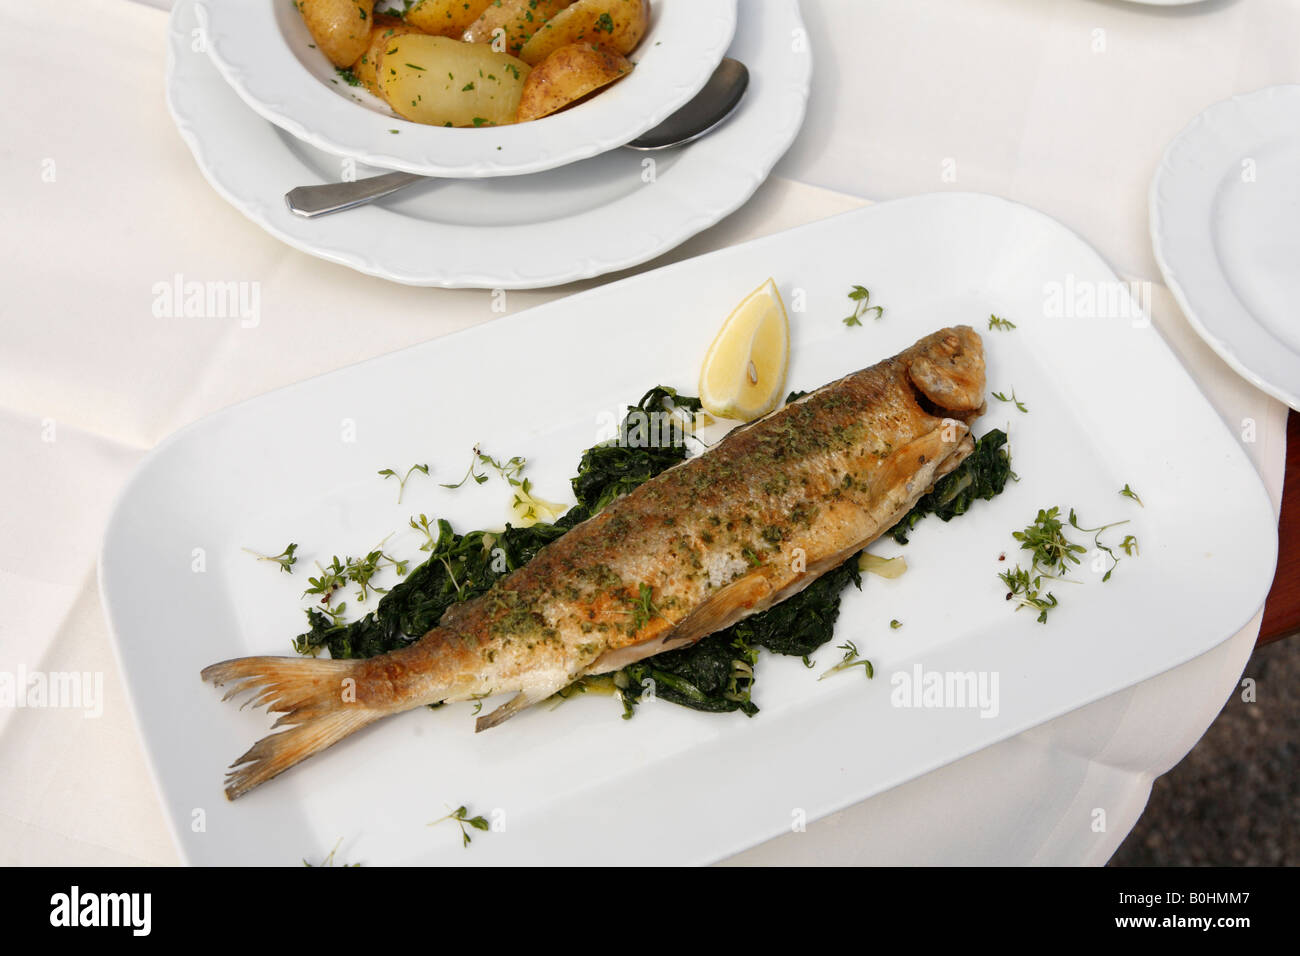 Whitefish caught in the Starnberger See, Starnberg Lake served on a bed of spinach, Restaurant Lido, Seeshaupt, Upper Bavaria,  Stock Photo